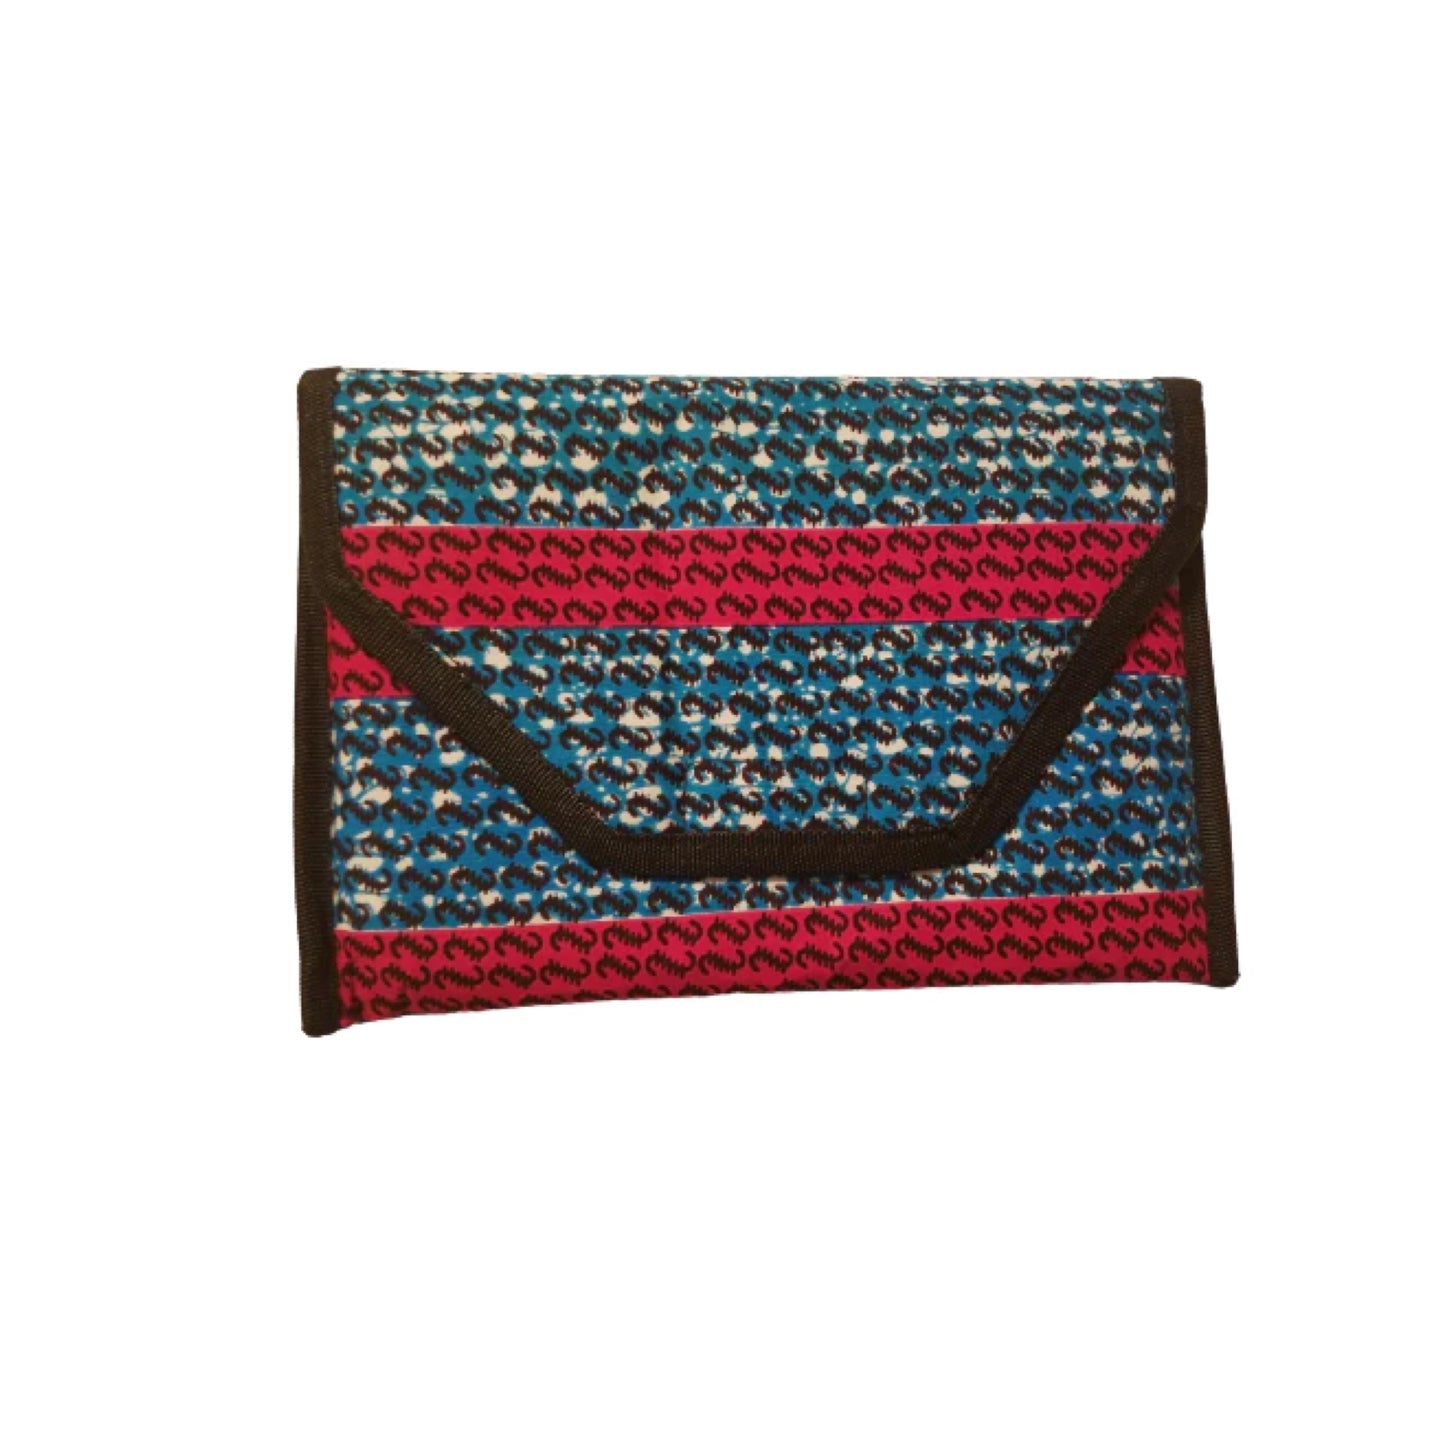 Bella Africa Clutch - Blue and Pink Made in Ghana